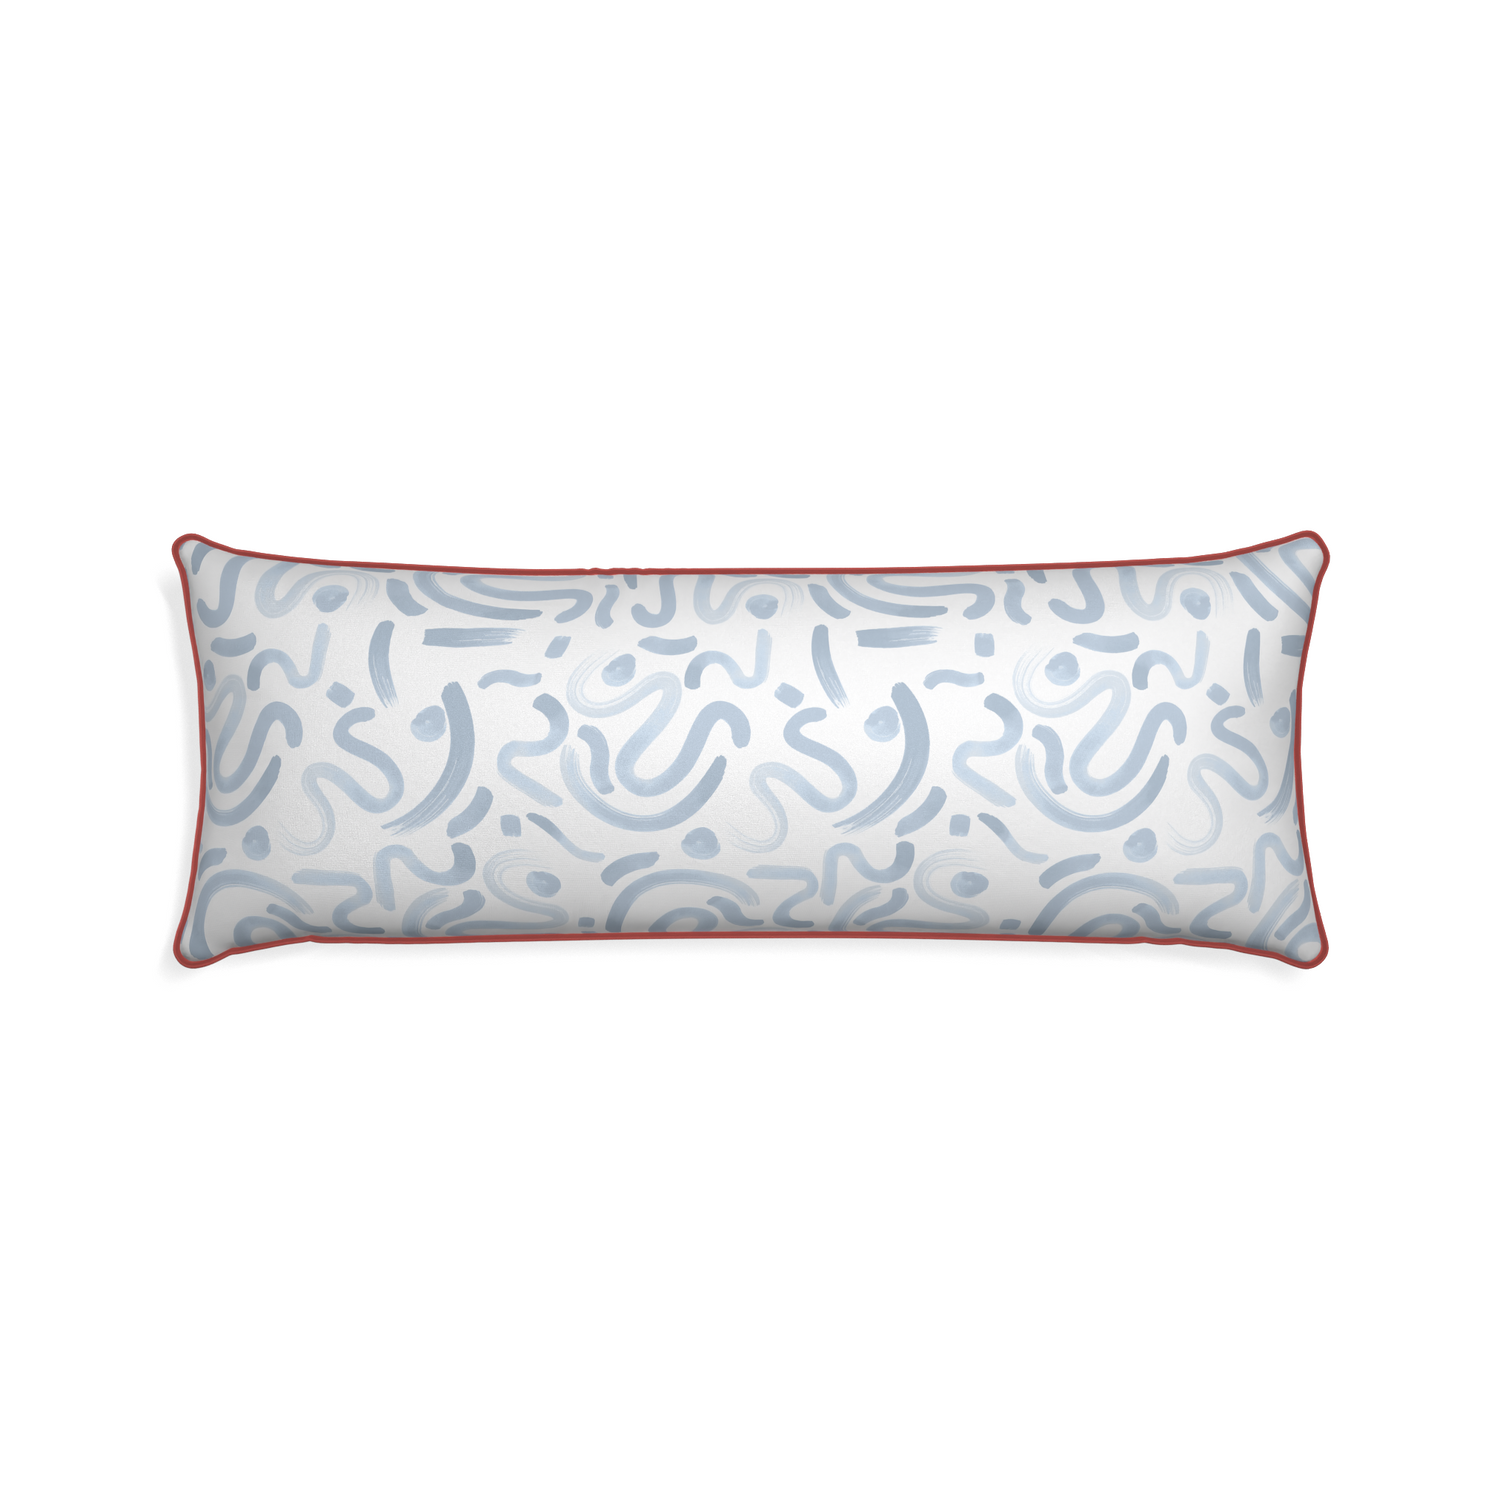 Xl-lumbar hockney sky custom pillow with c piping on white background